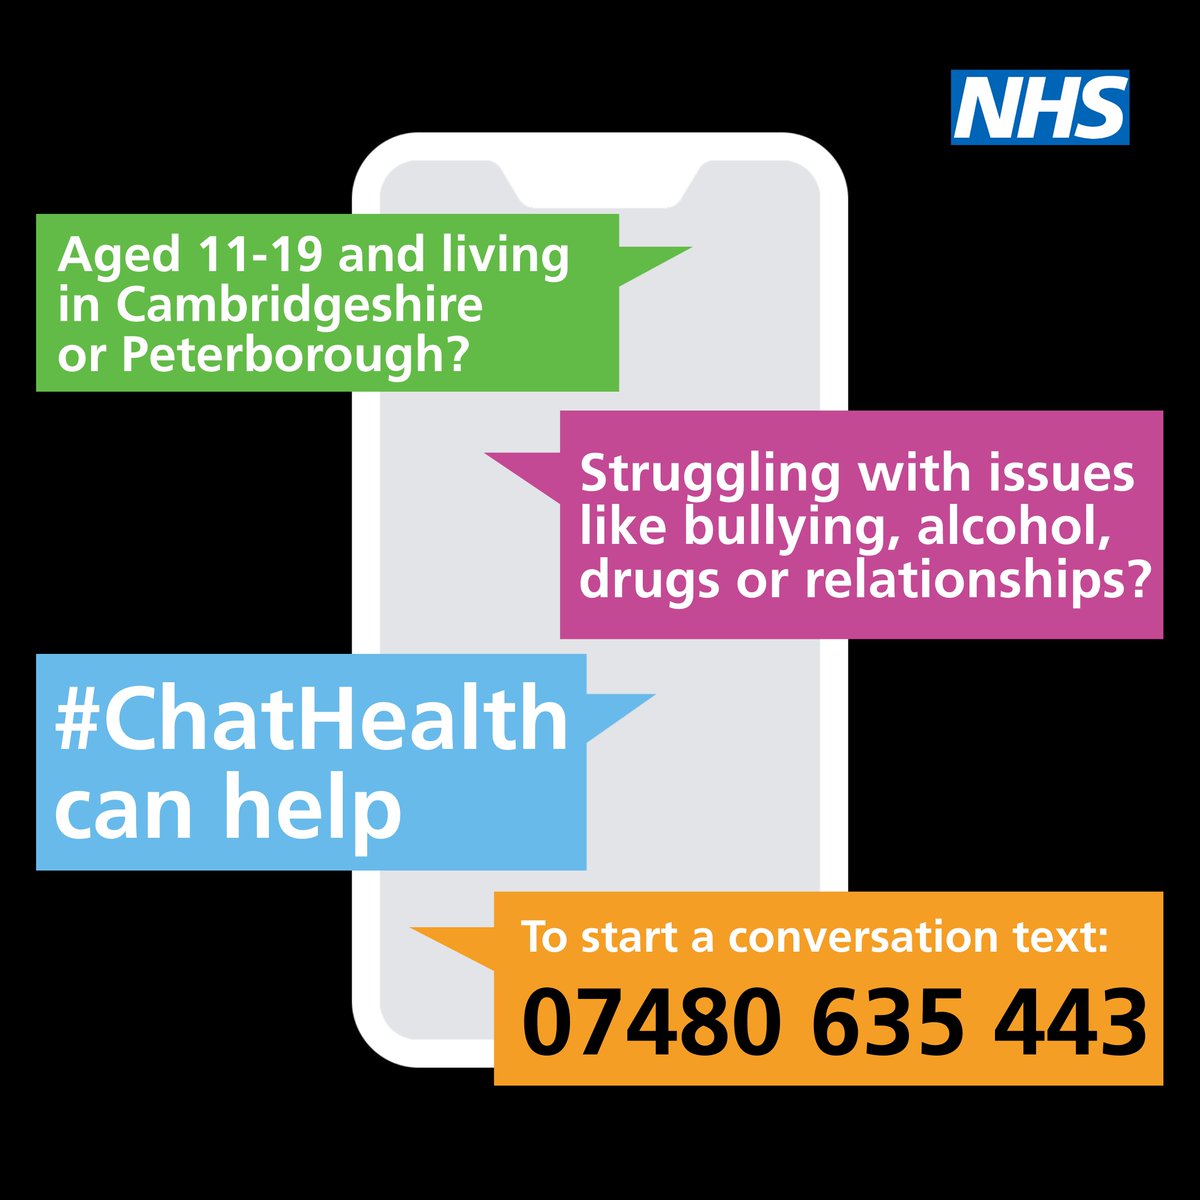 Professionals please share with your young people aged 11 to 19, living in #Cambridgeshire and #Peterborough👋

If they are struggling with issues like bullying, alcohol, drugs or relationships then #ChatHealth can help!

To start a conversation they can text 07480 635 443 📱💬